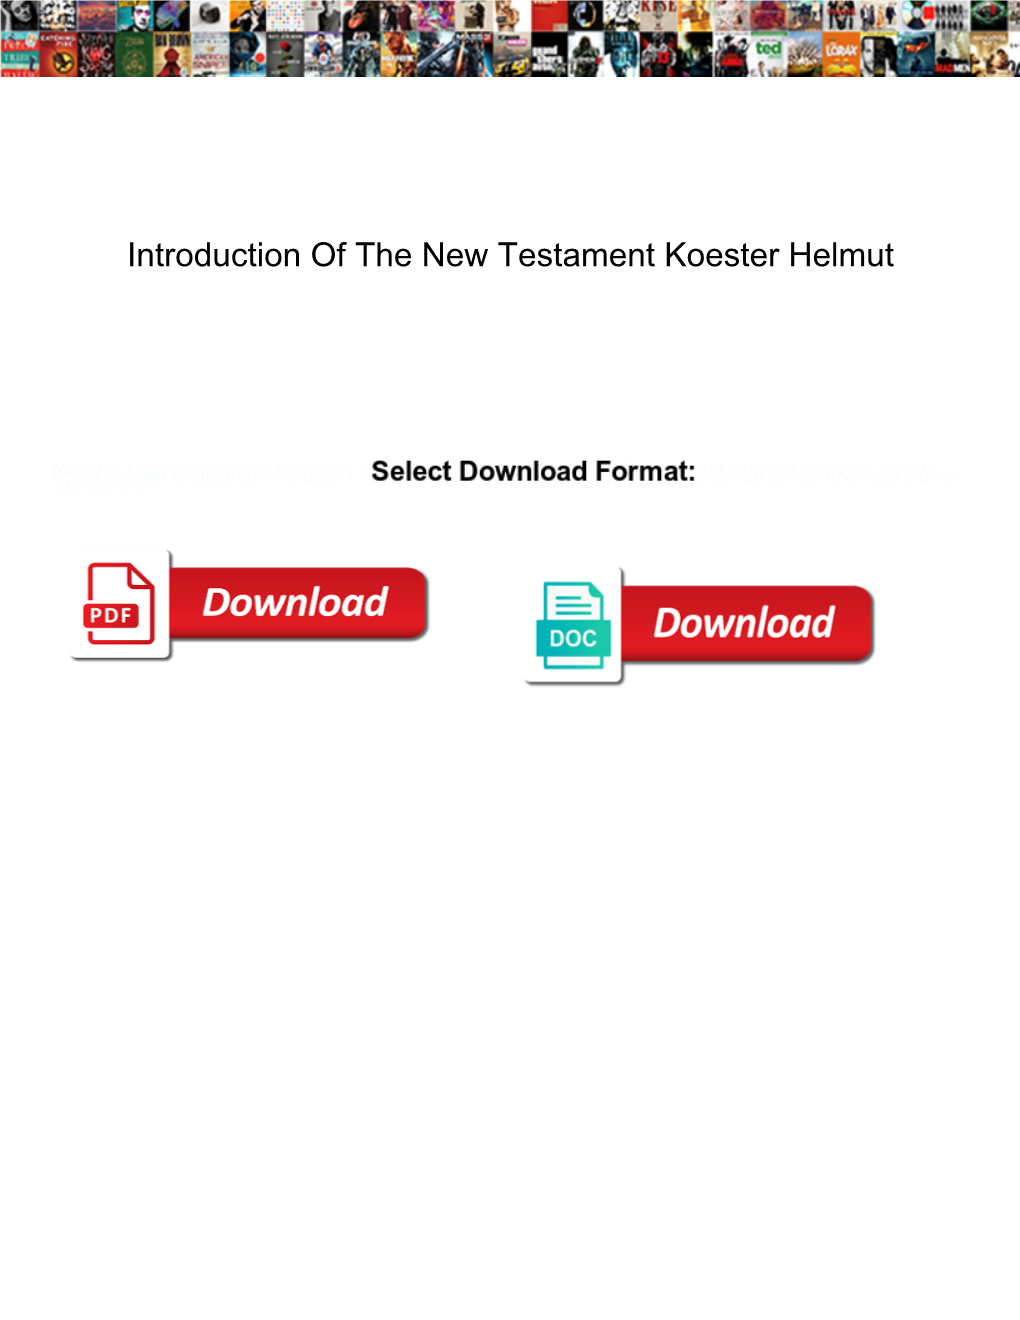 Introduction of the New Testament Koester Helmut